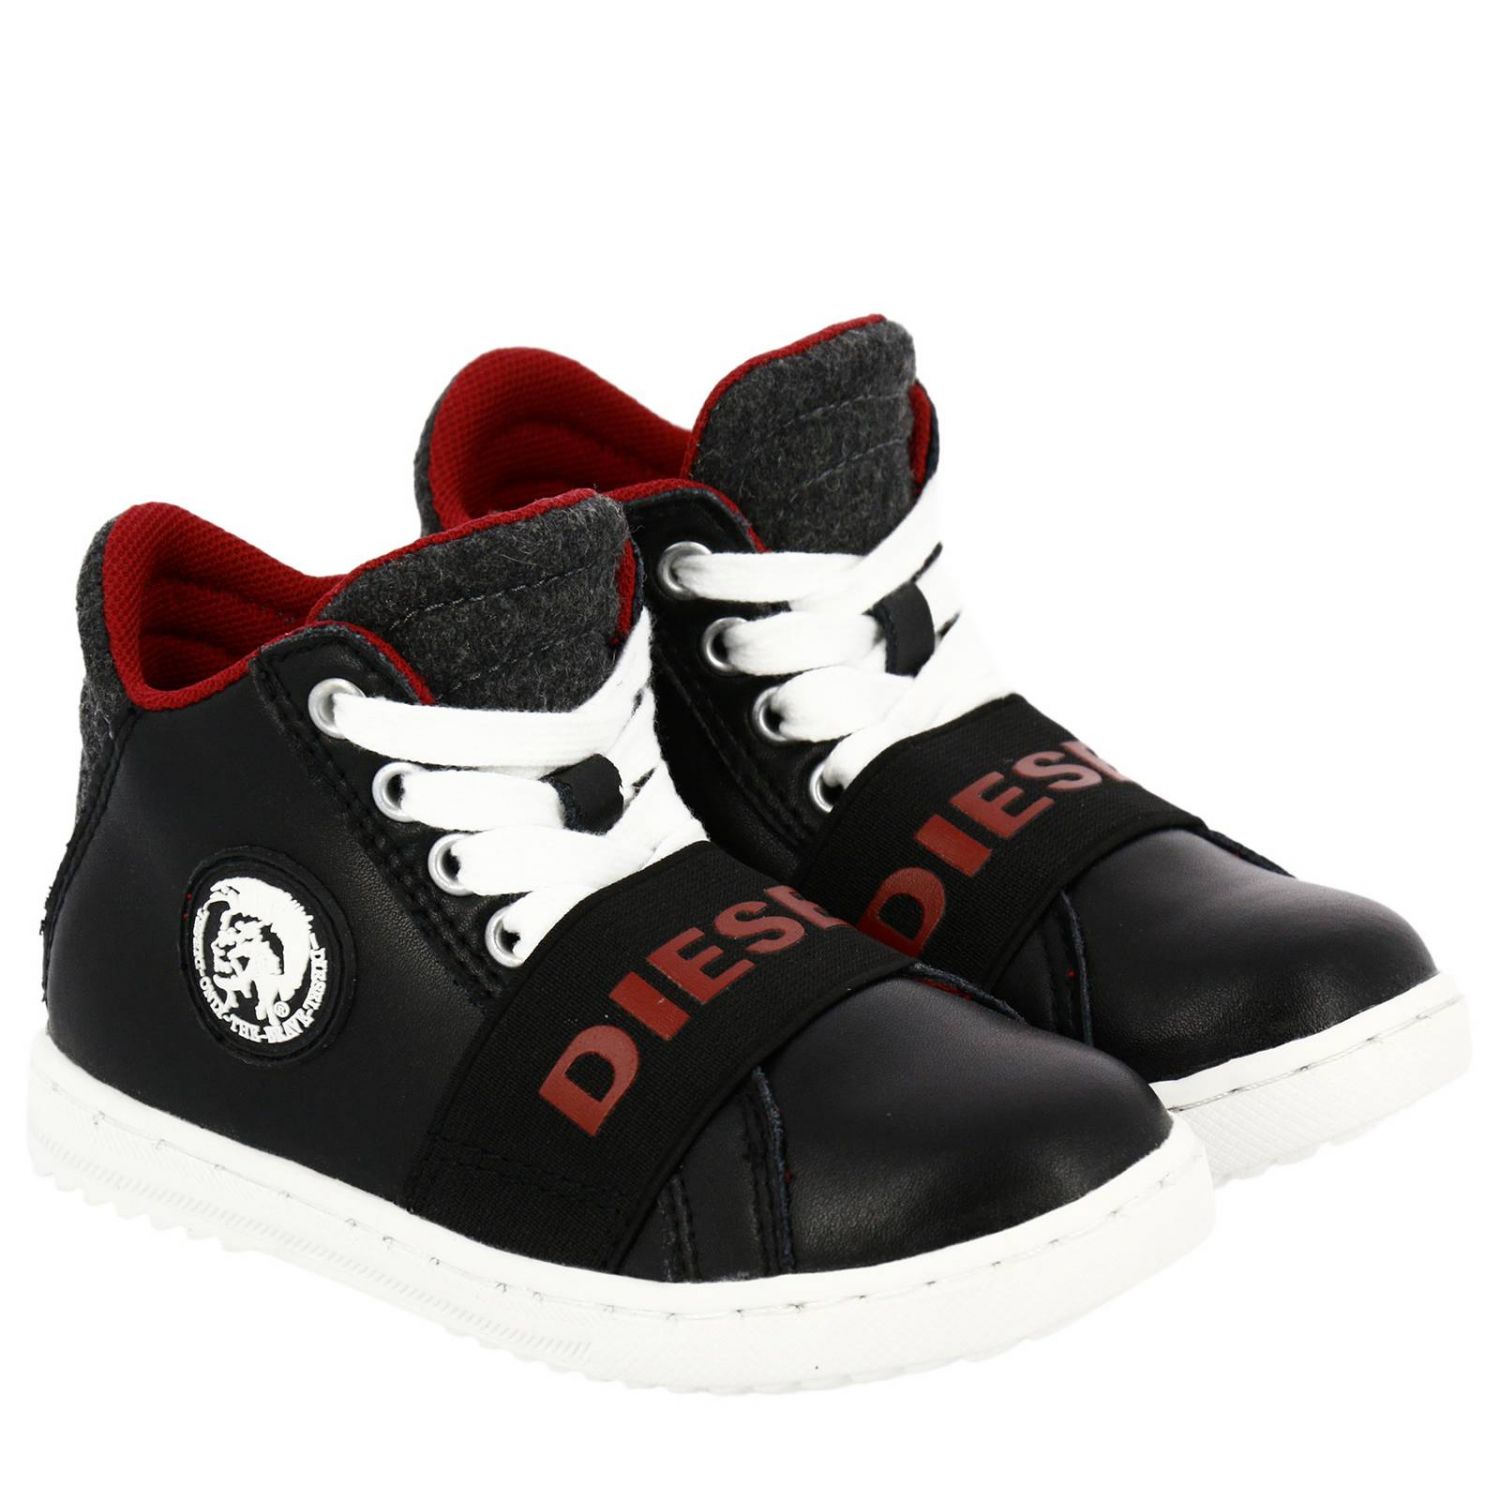 Diesel Outlet: Shoes kids - Black | Shoes Diesel BC0050 GIGLIO.COM